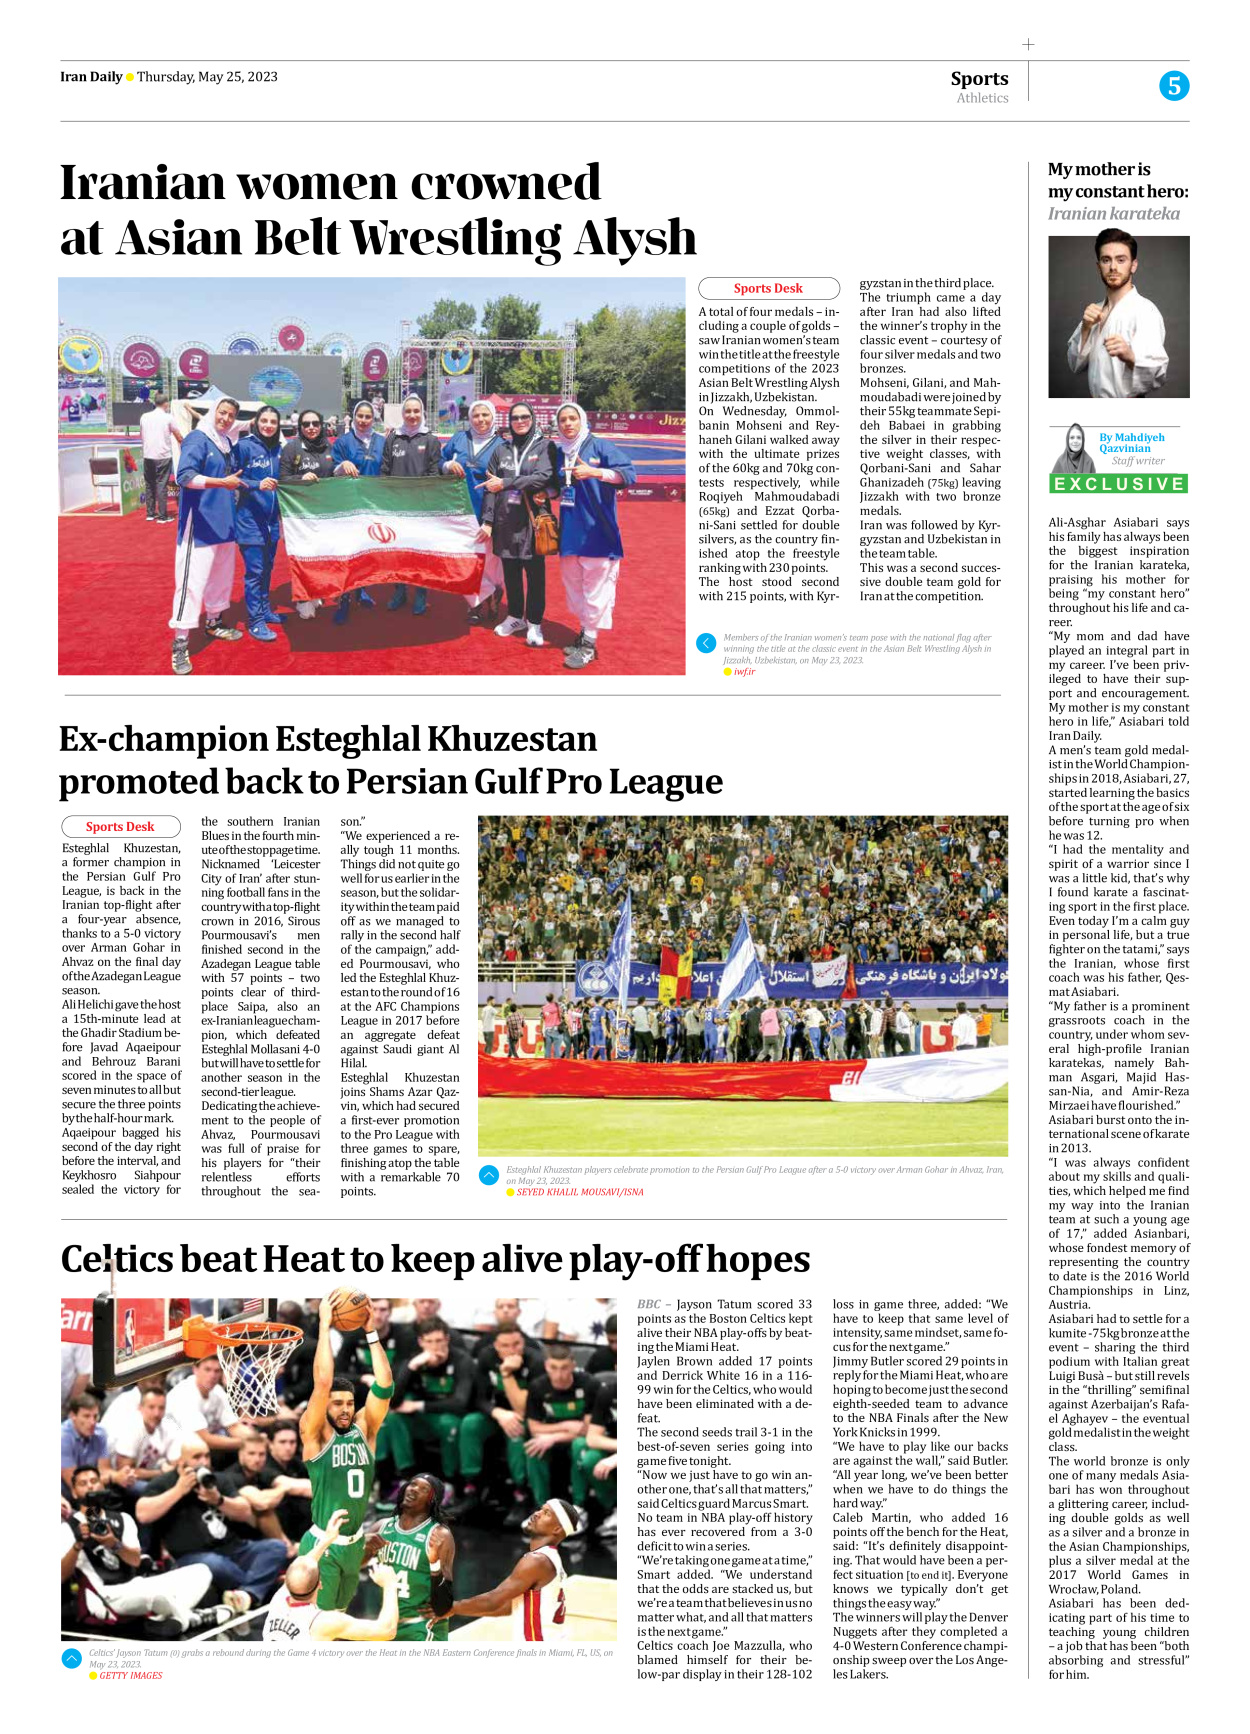 Iran Daily - Number Seven Thousand Three Hundred - 25 May 2023 - Page 5